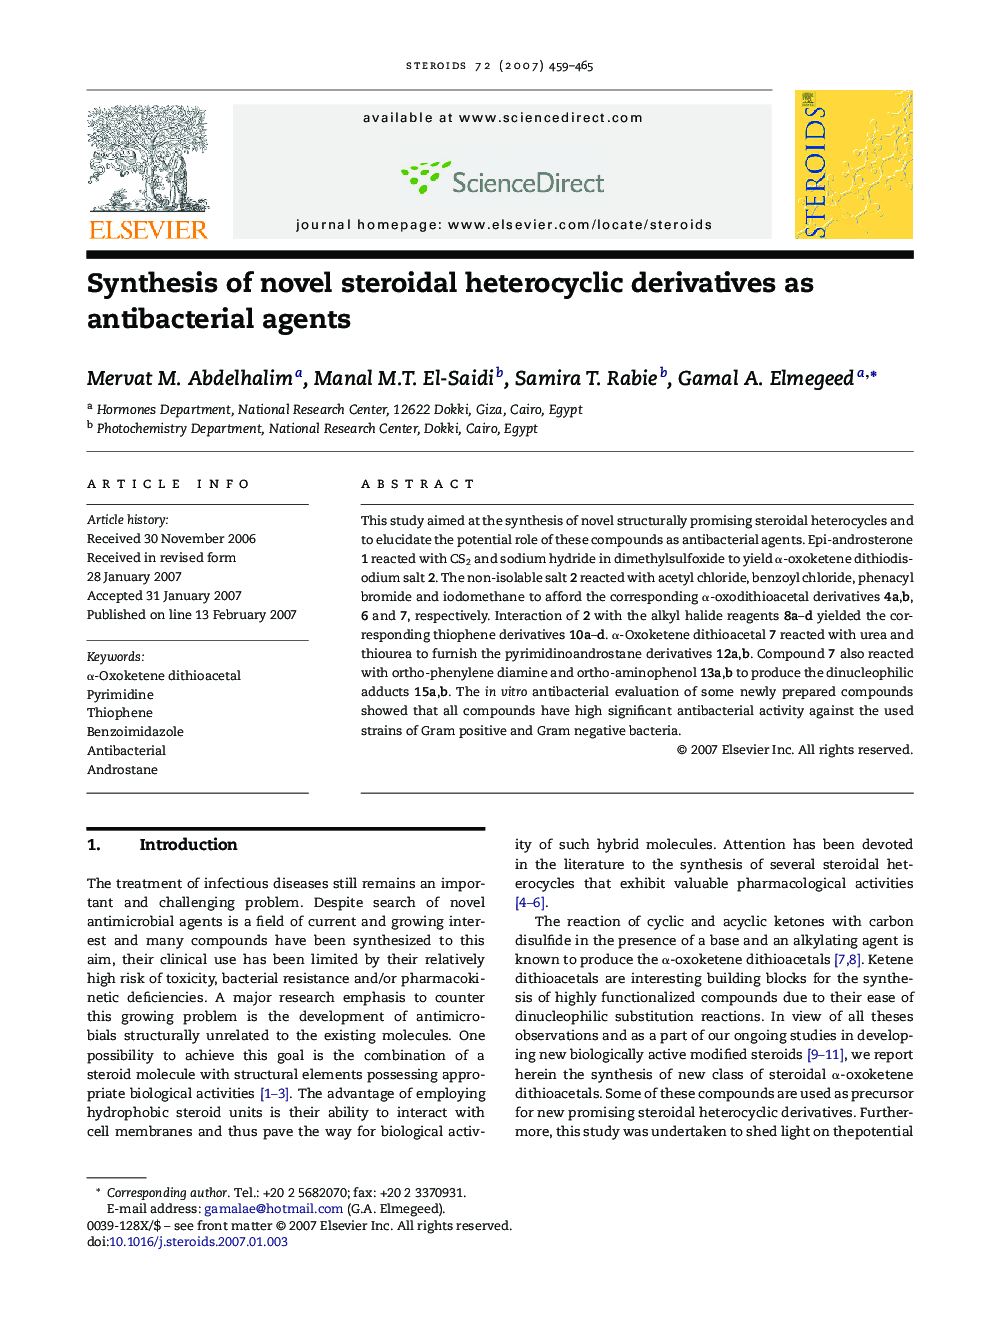 Synthesis of novel steroidal heterocyclic derivatives as antibacterial agents